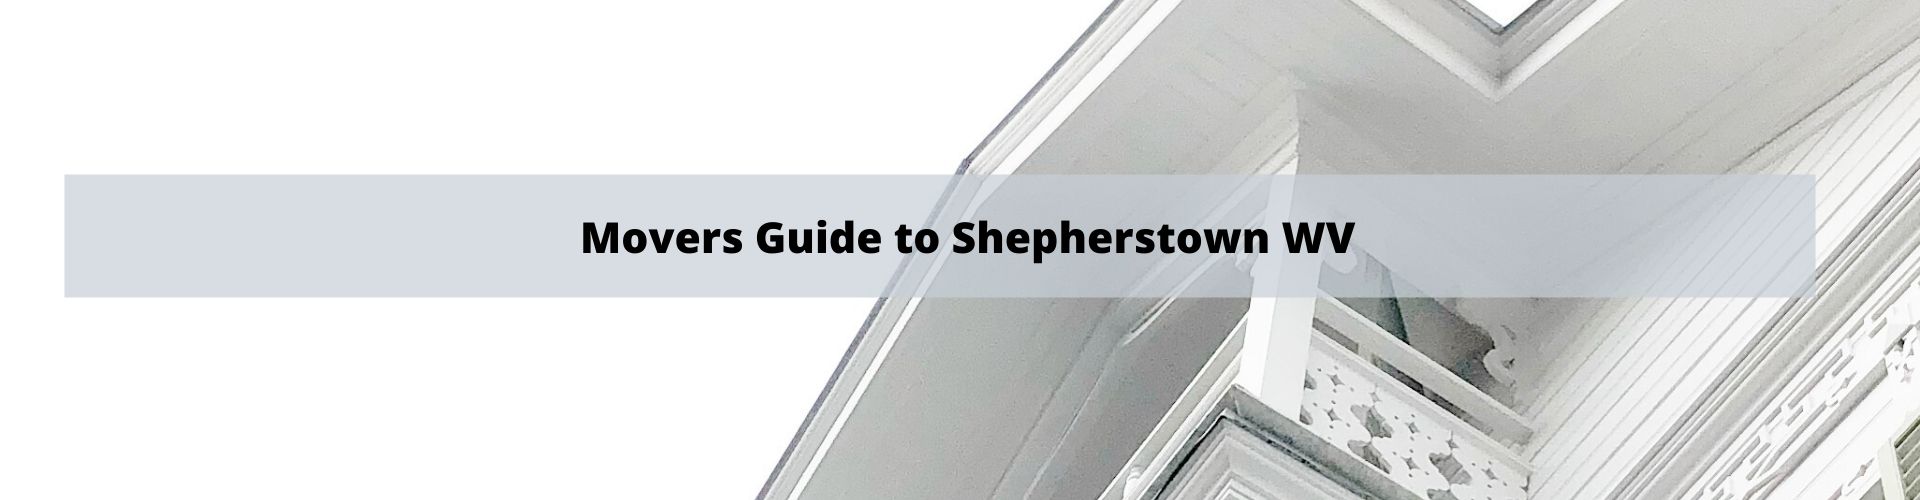 Mover's Guide to Shepherdstown WV